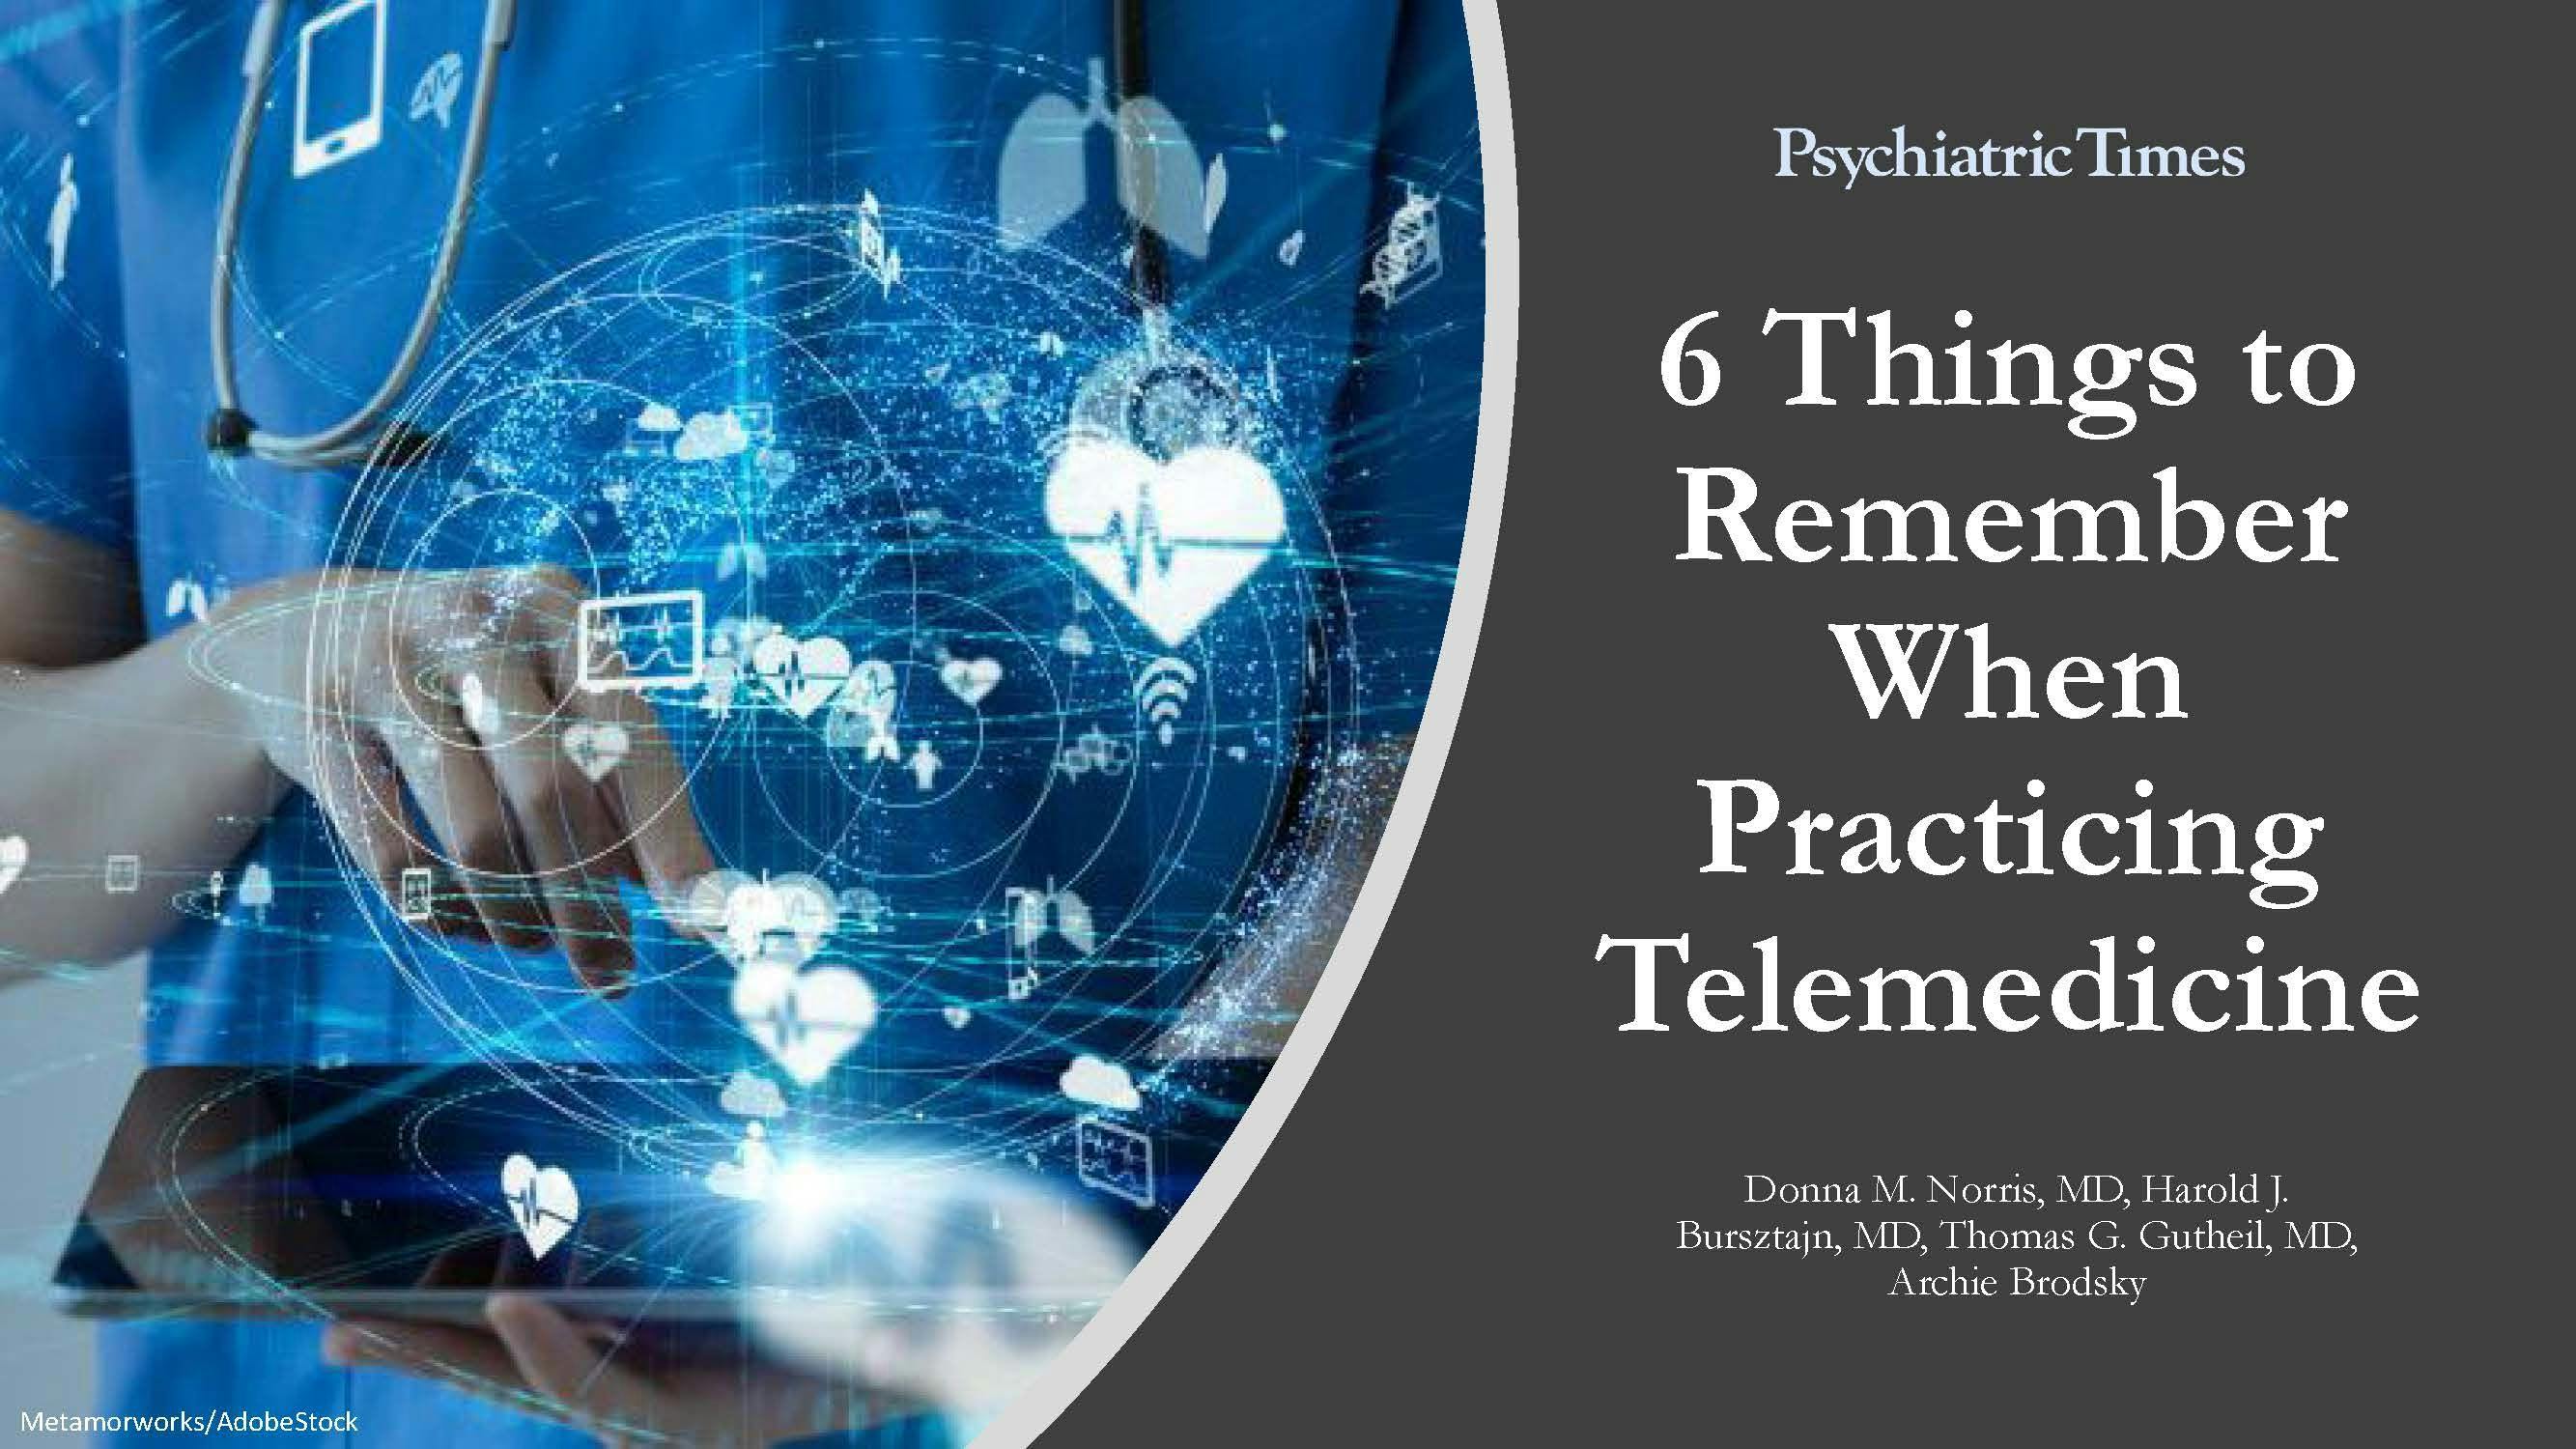 6 Things to Remember When Practicing Telemedicine